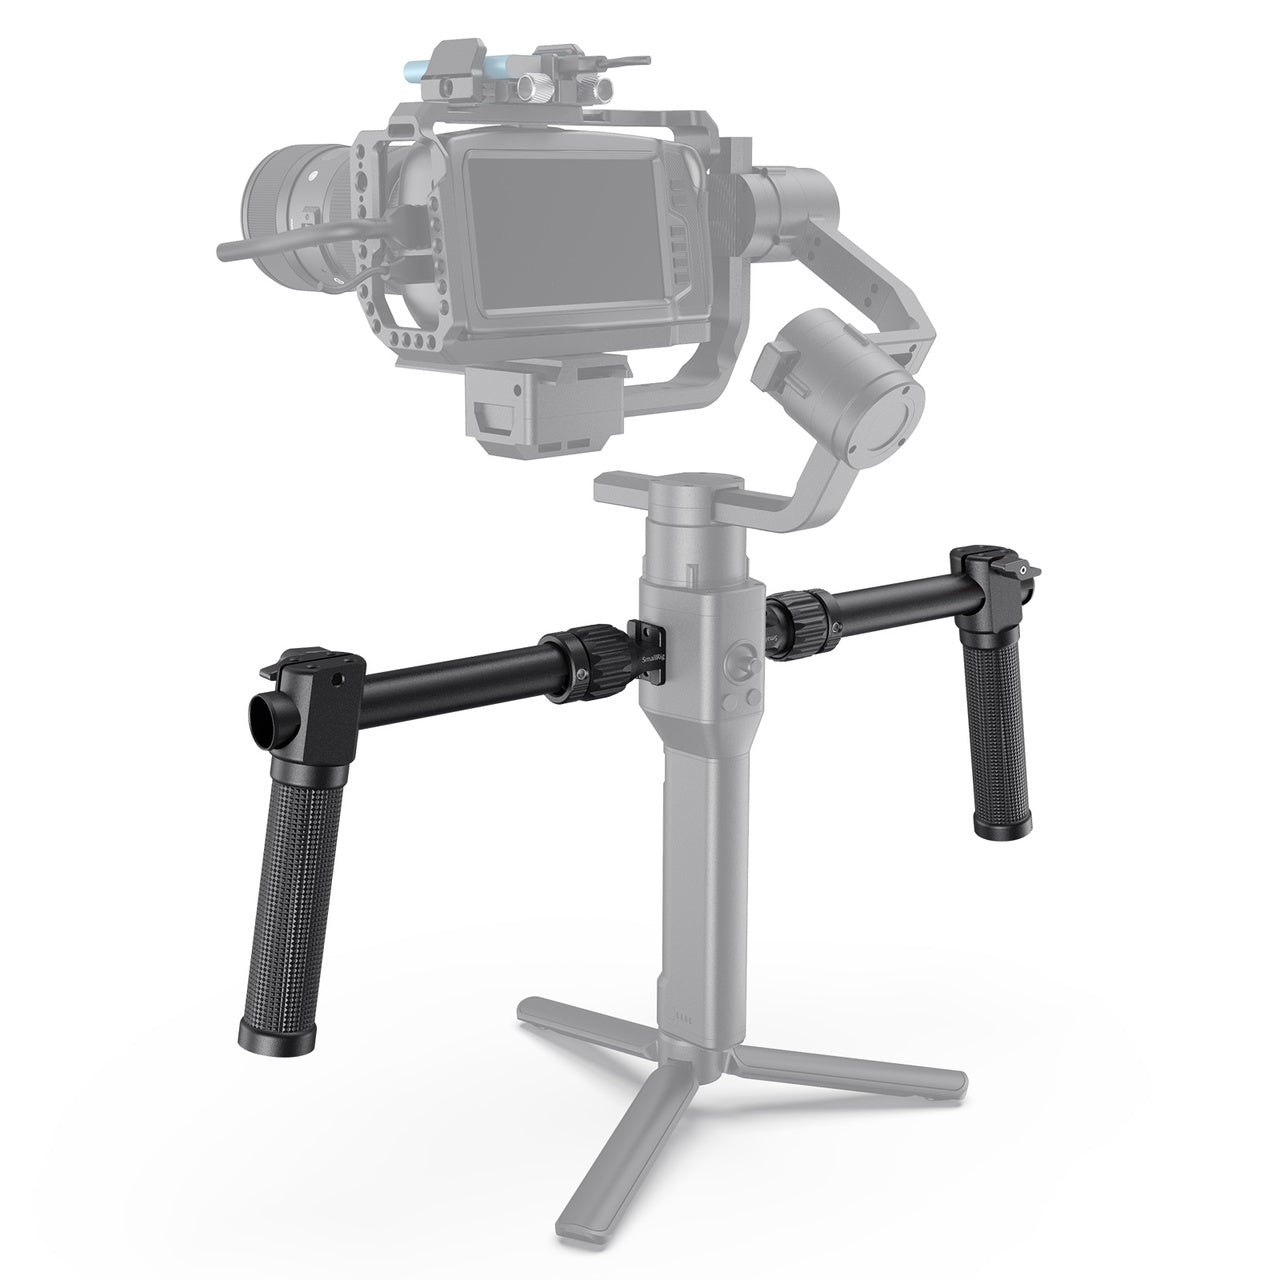 SMALLRIG Centered Dual Handgrip for DJI Ronin-S and Ronin-SC Gimbal MD2519